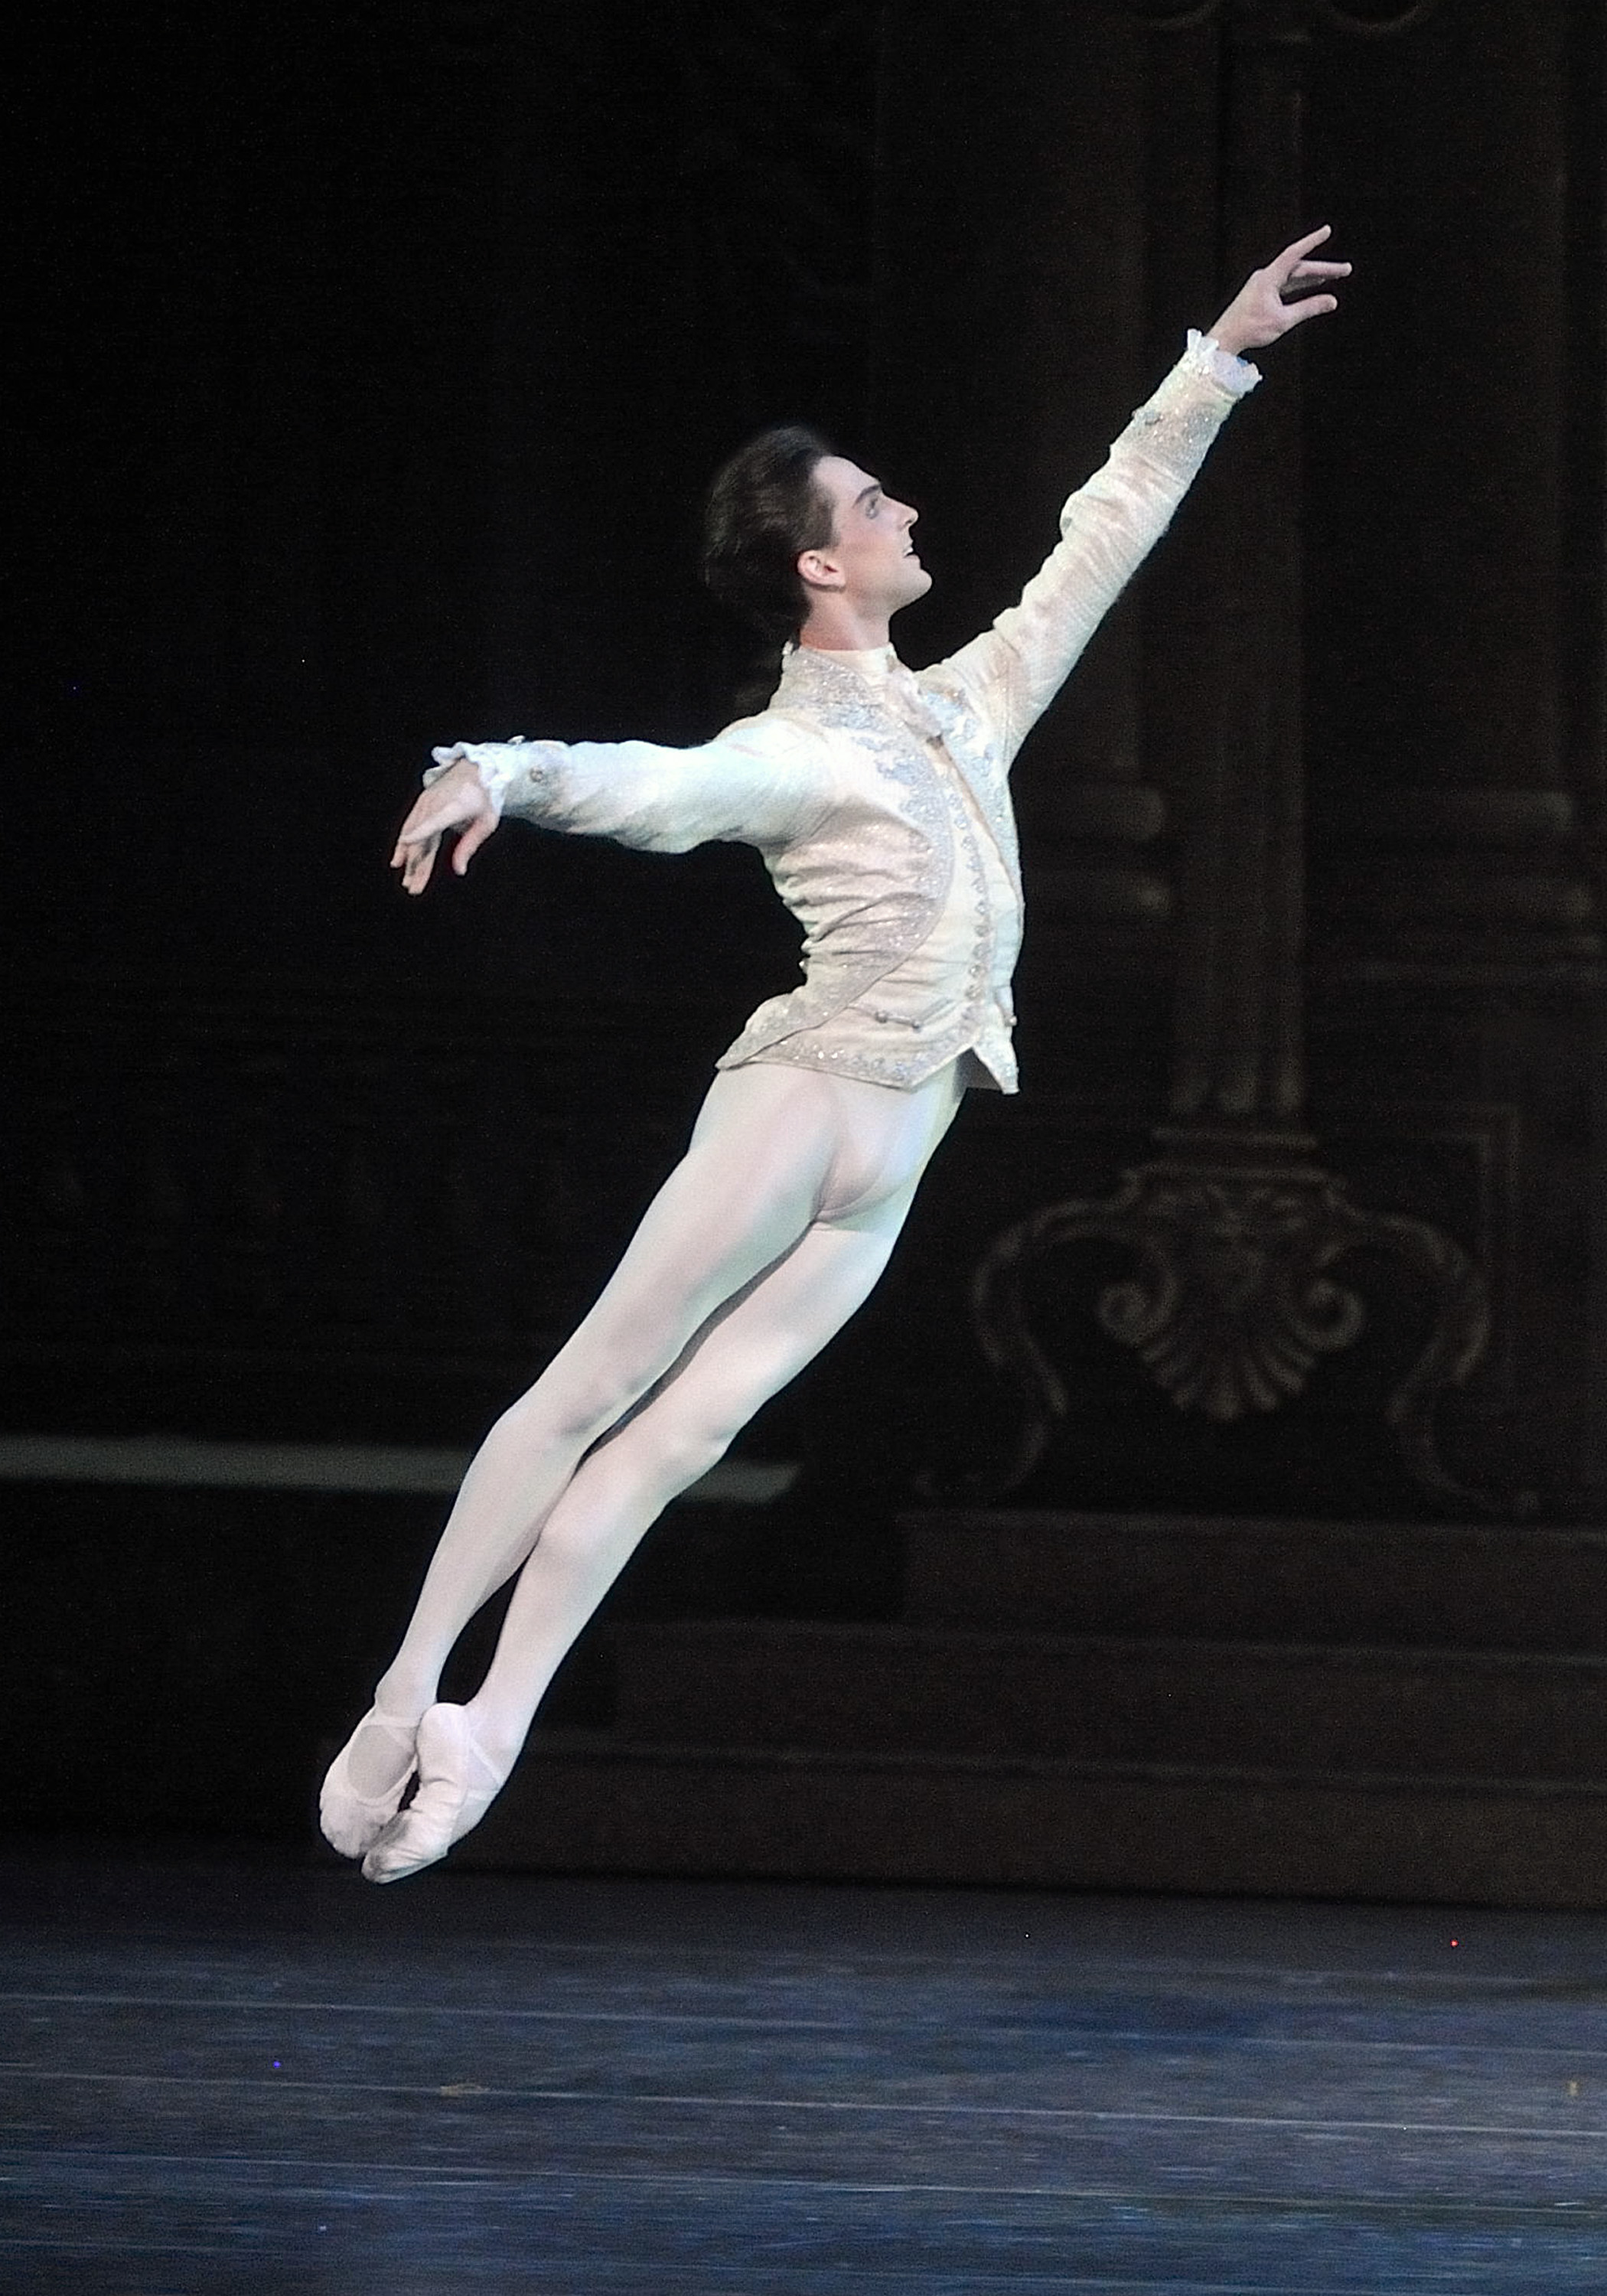 Pictures of Sascha Radetsky - Pictures Of Celebrities